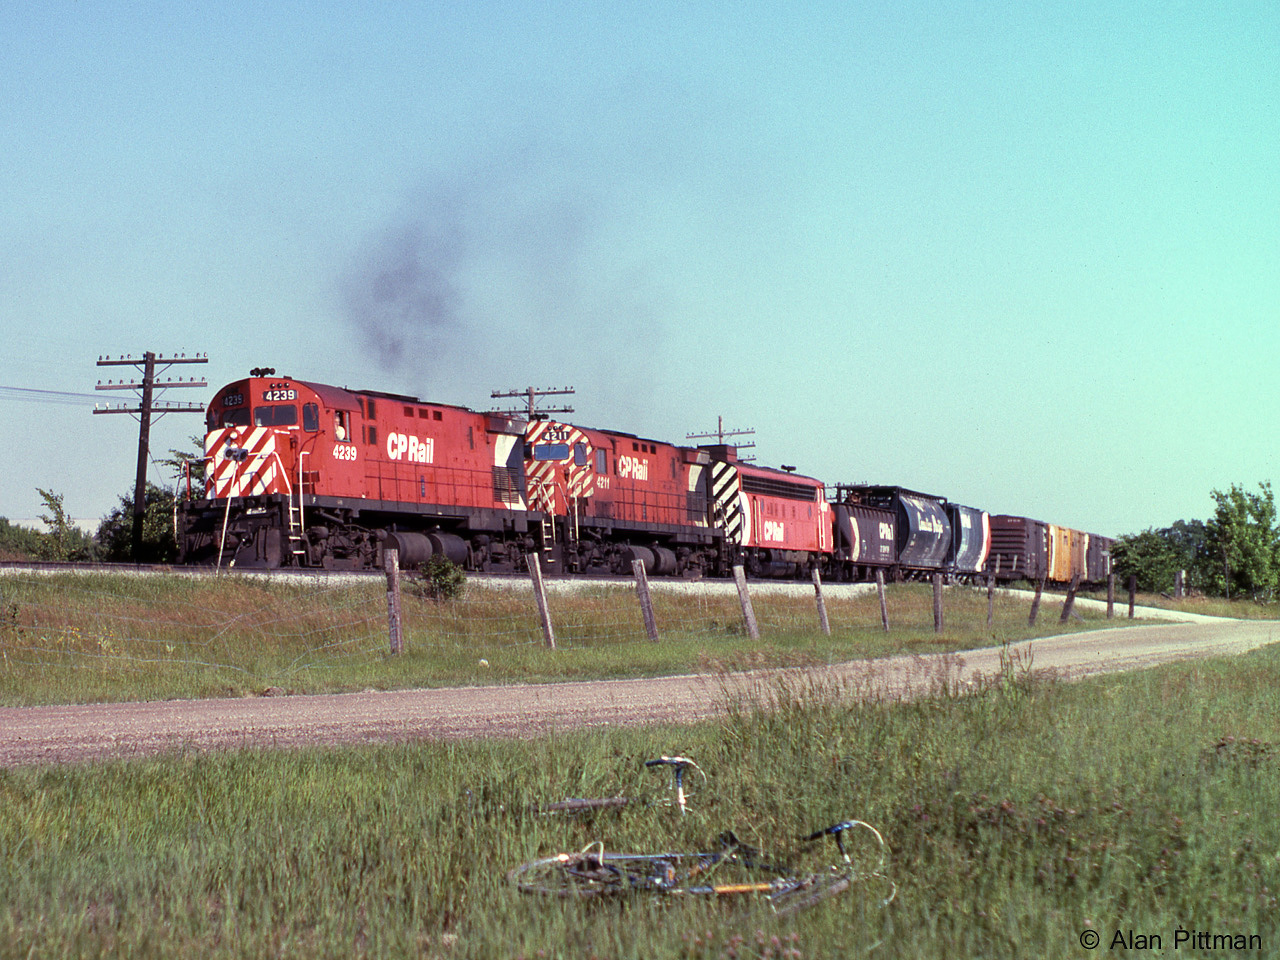 C424's CP 4239 and CP 4211 and an FP7A are working hard pulling a long train of general freight northbound on the Mactier sub. Recently re-painted CP 4239 has the wide stripe multimark scheme, as does the FP7A. CP 4211 wears the original narrow stripe multimark scheme it received some years before.
The train is on the main line with Elder siding between it and the photographer. 
Interesting flatcar loads on this train included a combine harvester and a large transformer.
Our mode of transport was hastily abandoned in the grass when my brother and I heard this train coming. We were only expecting to see "The Canadian".
Since 1991 the south lead to CP's Vaughan Intermodal Terminal branches off Elder siding right about here.